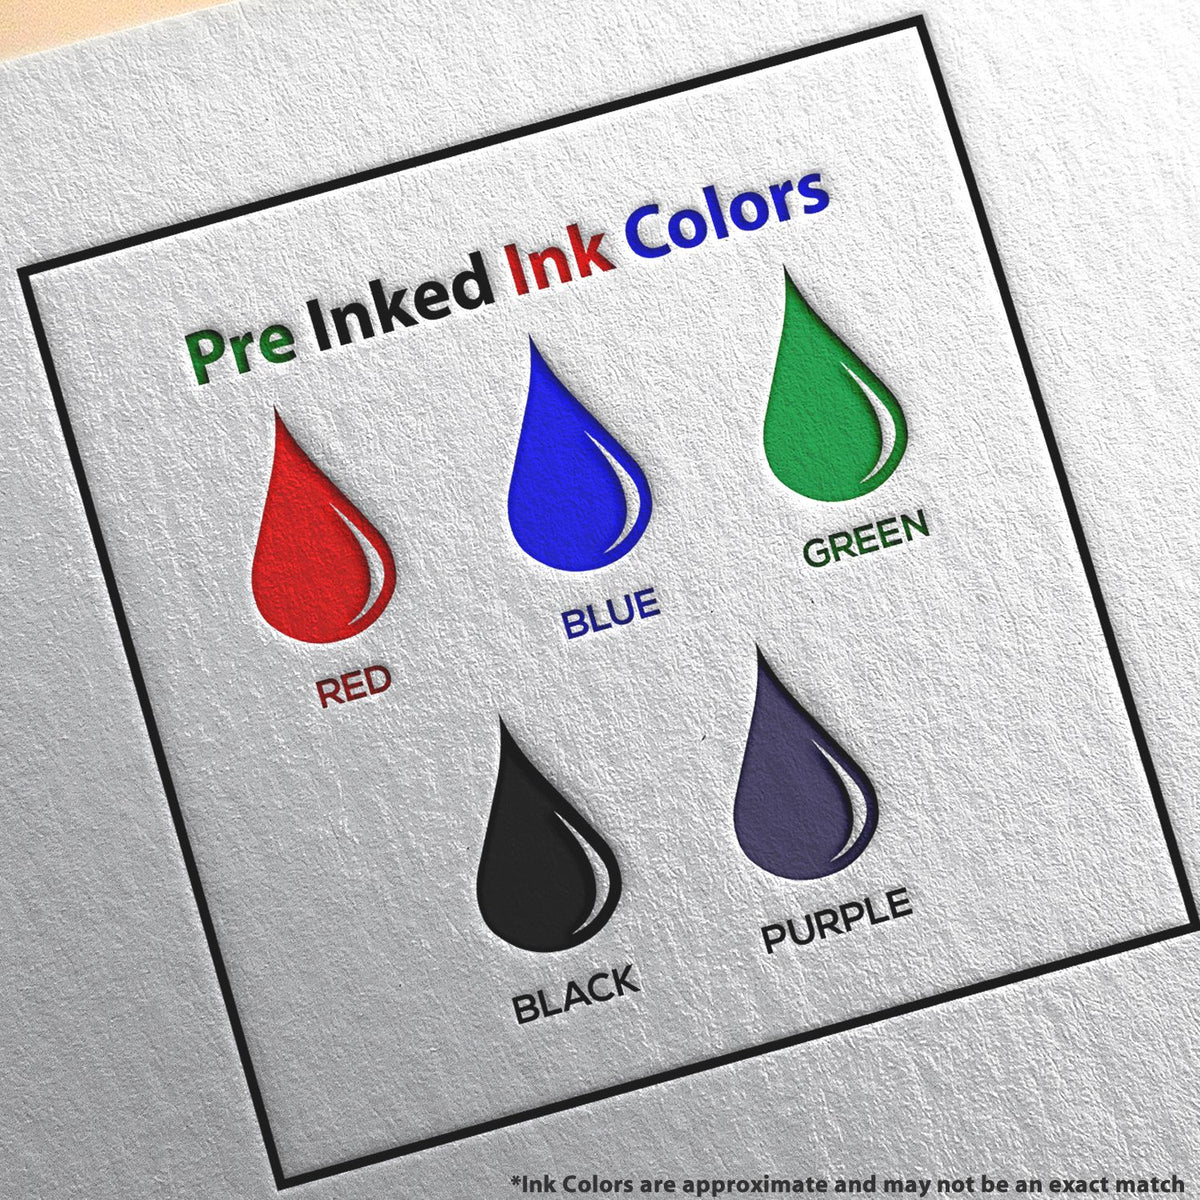 A picture showing the different ink colors or hues available for the Slim Pre-Inked Minnesota Professional Geologist Seal Stamp